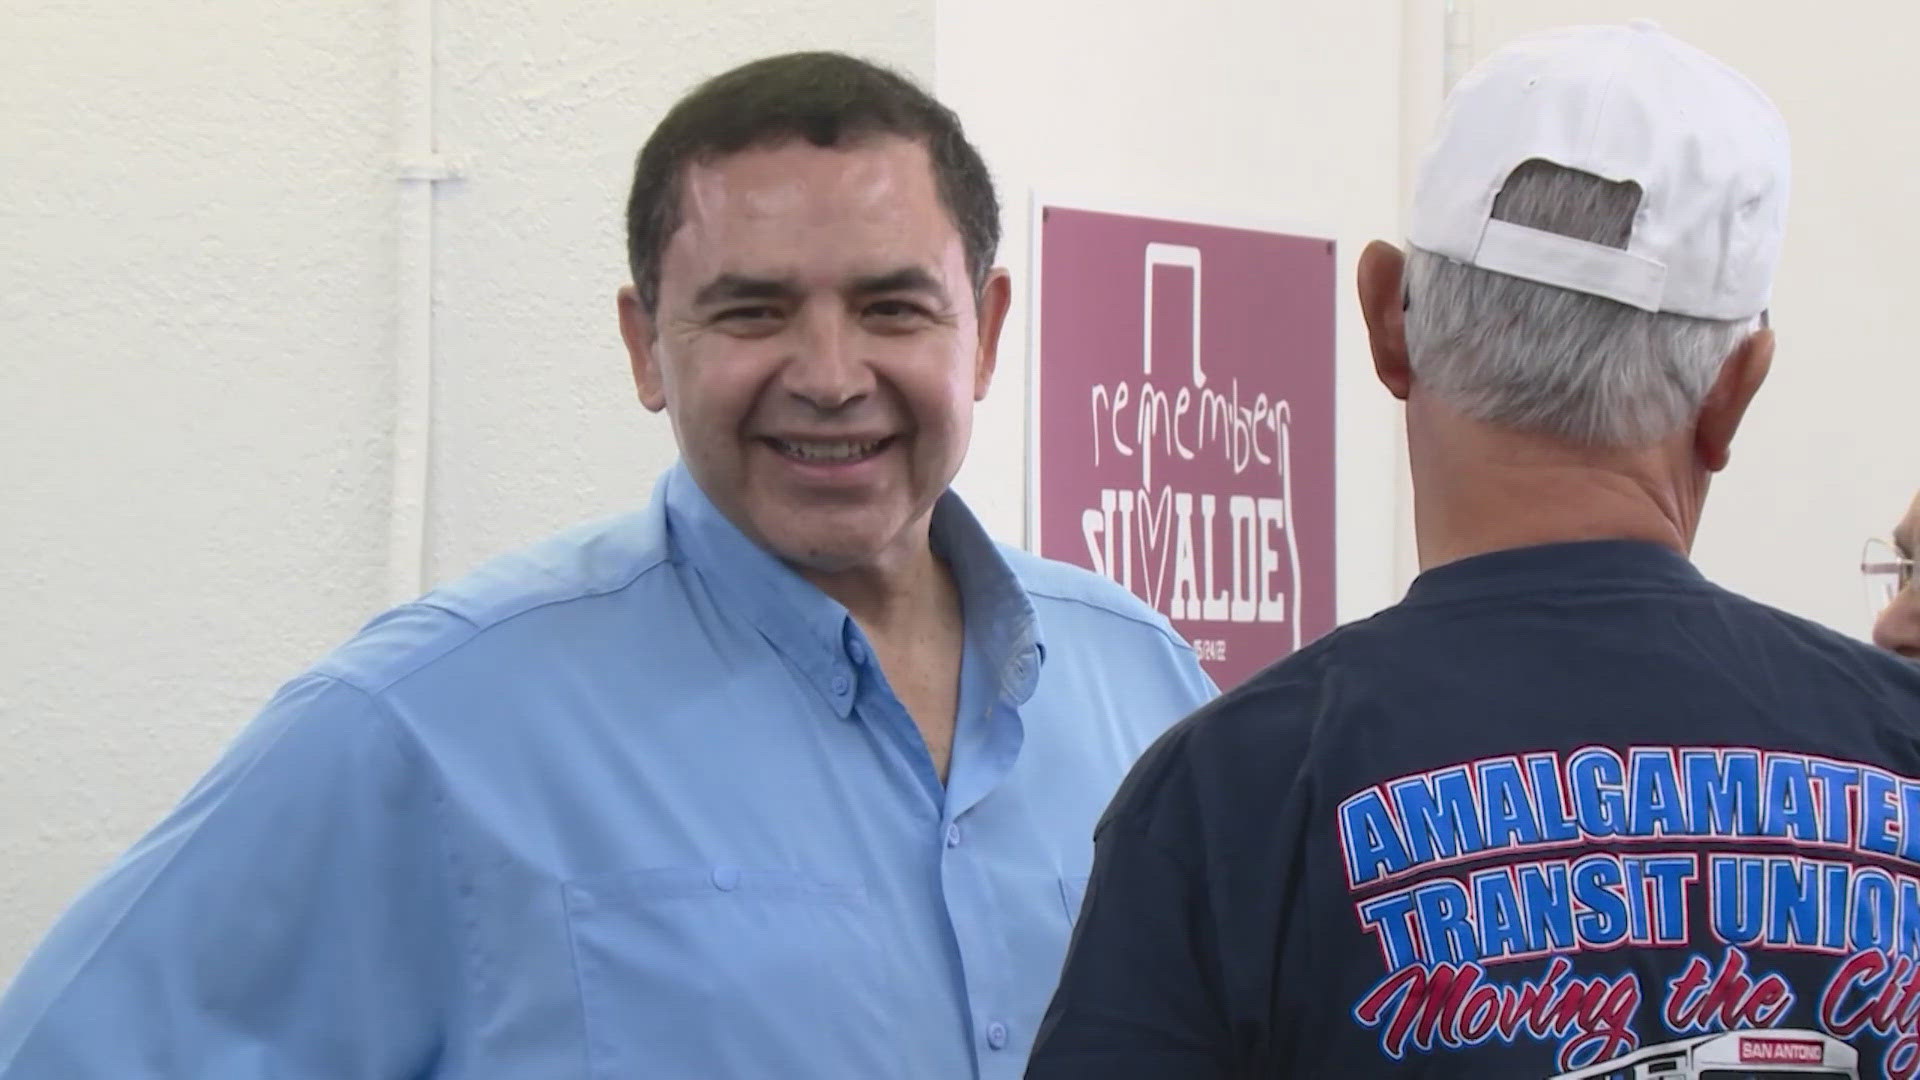 Cuellar said he's still running for re-election in November.